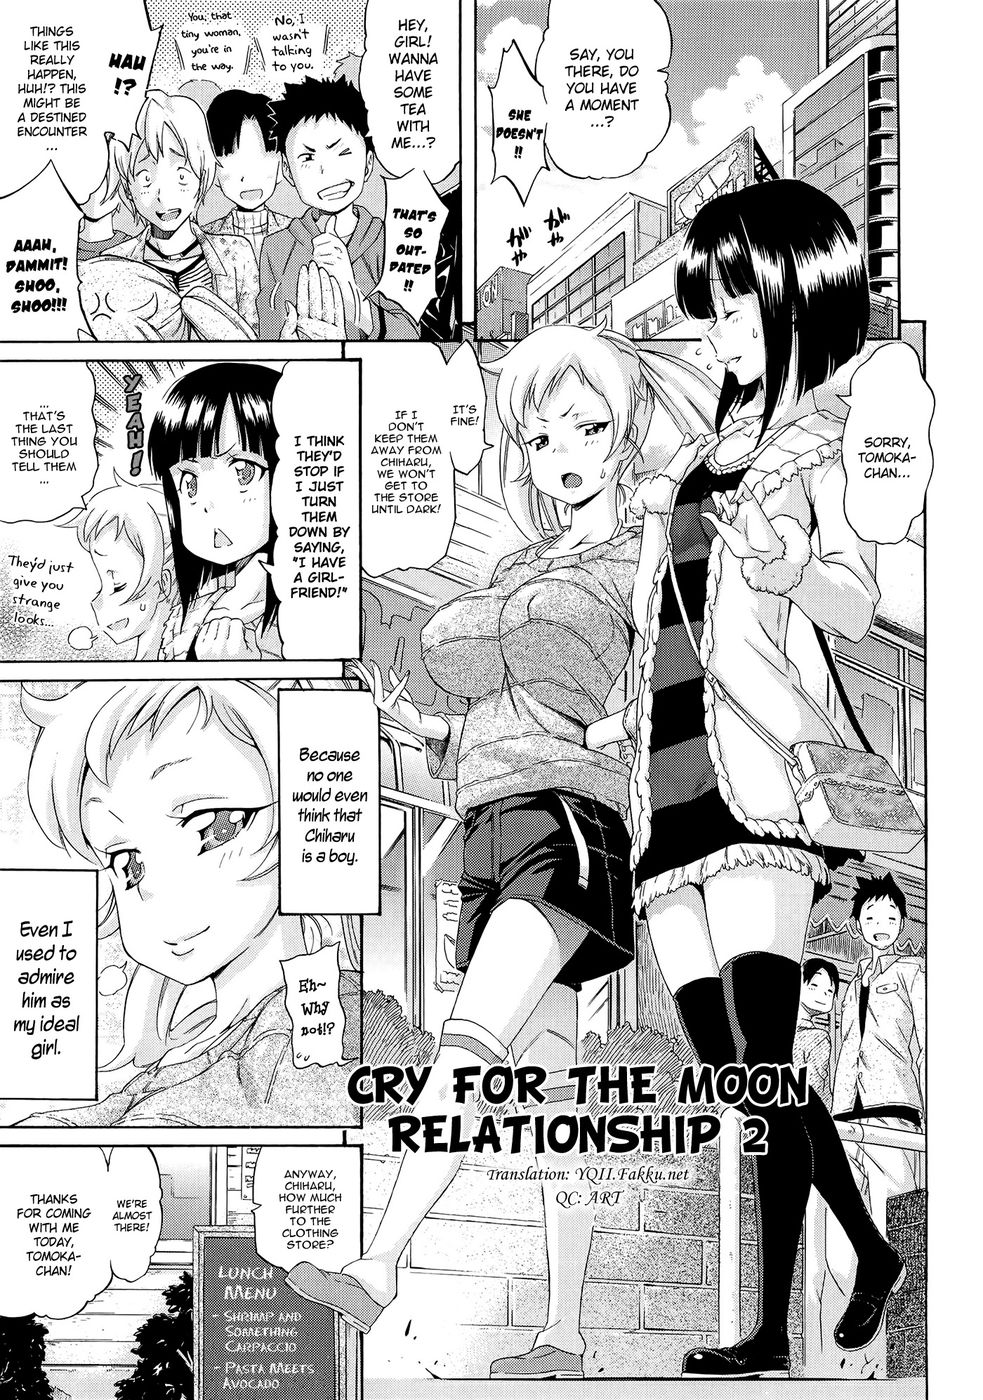 Hentai Manga Comic-Melody-Chapter 3-Cry For The Moon Relationship 2-1